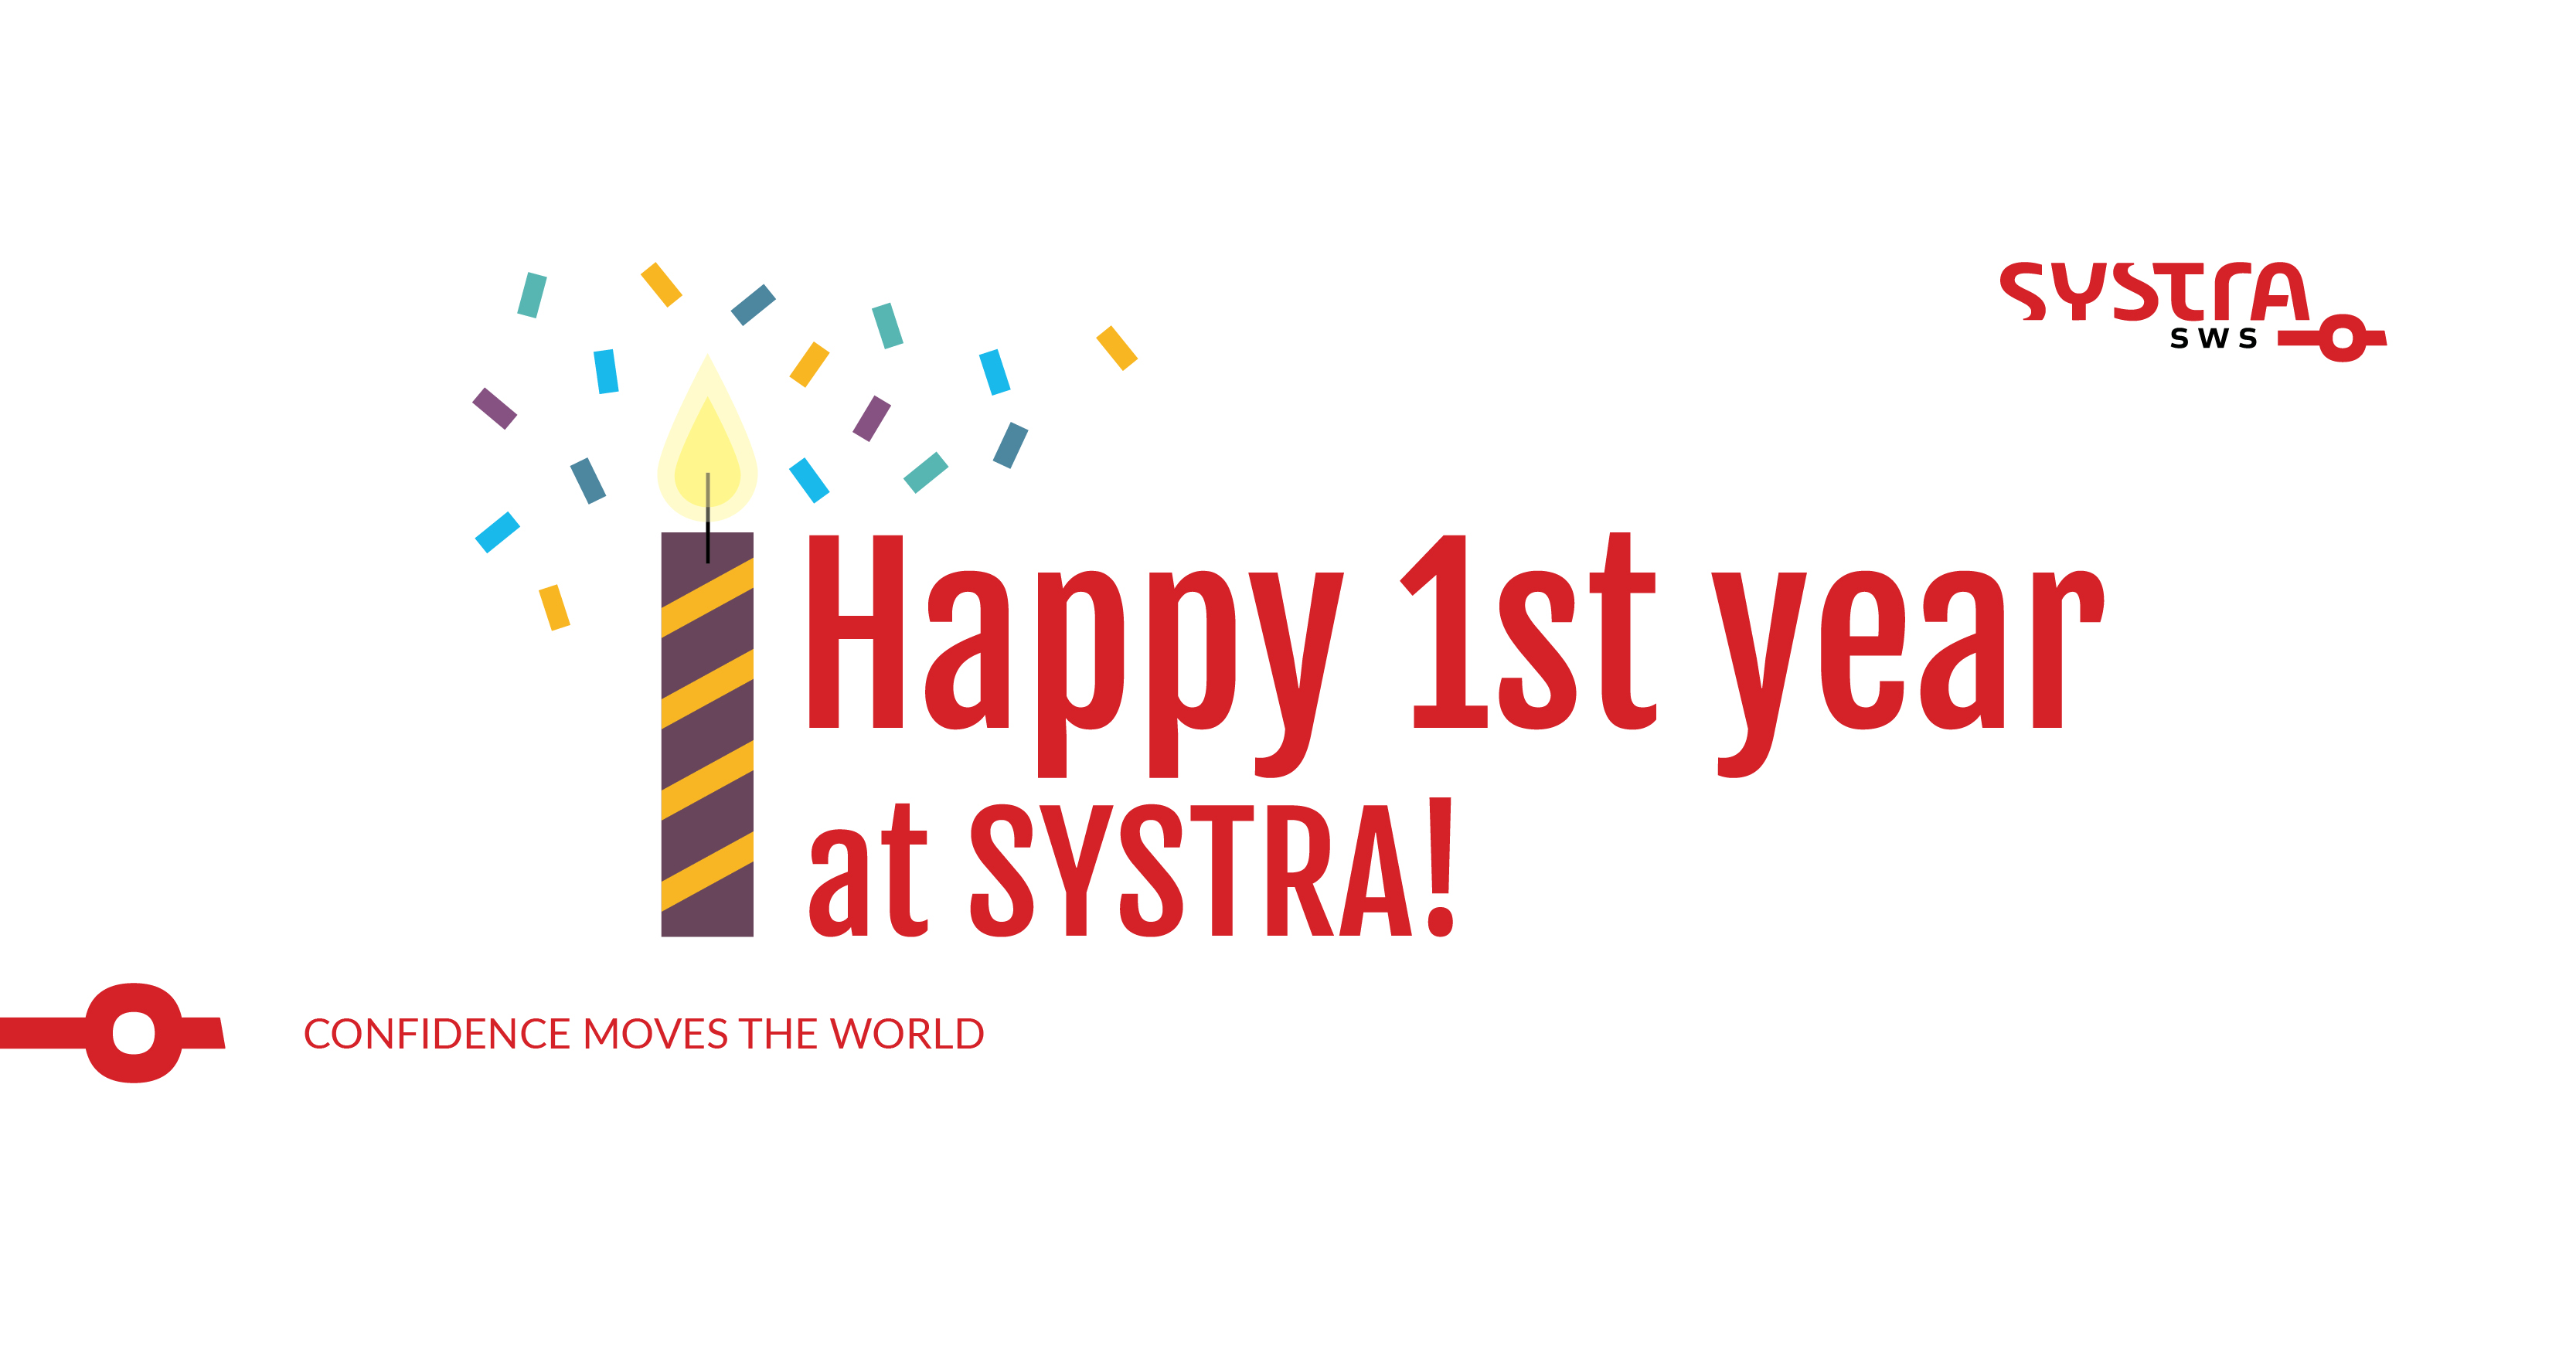 Happy 1st year at SYSTRA!